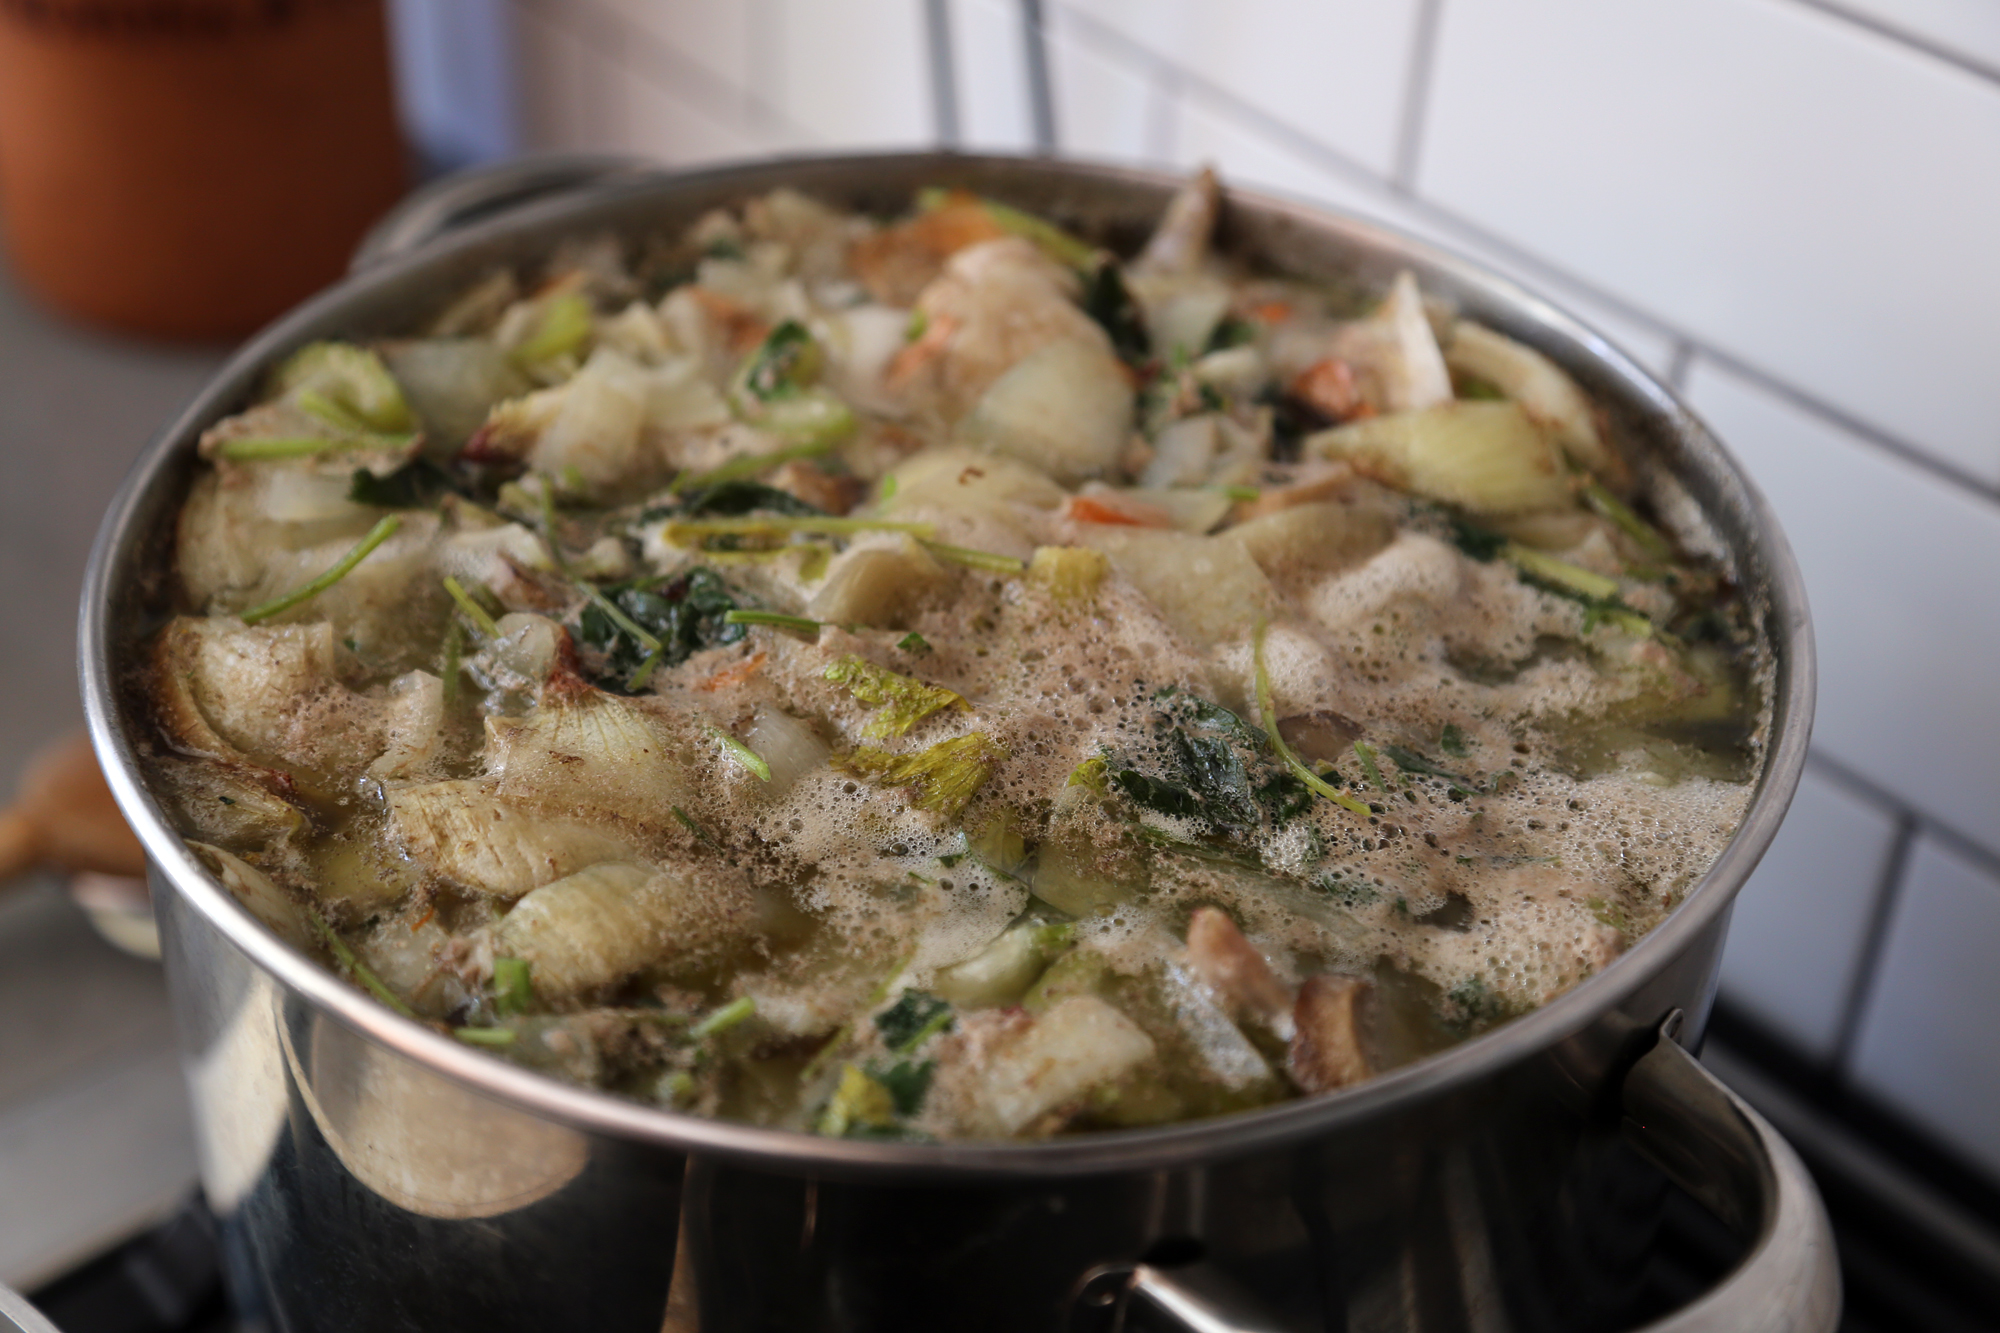 Reduce the heat to low and let simmer gently for about 2 hours.